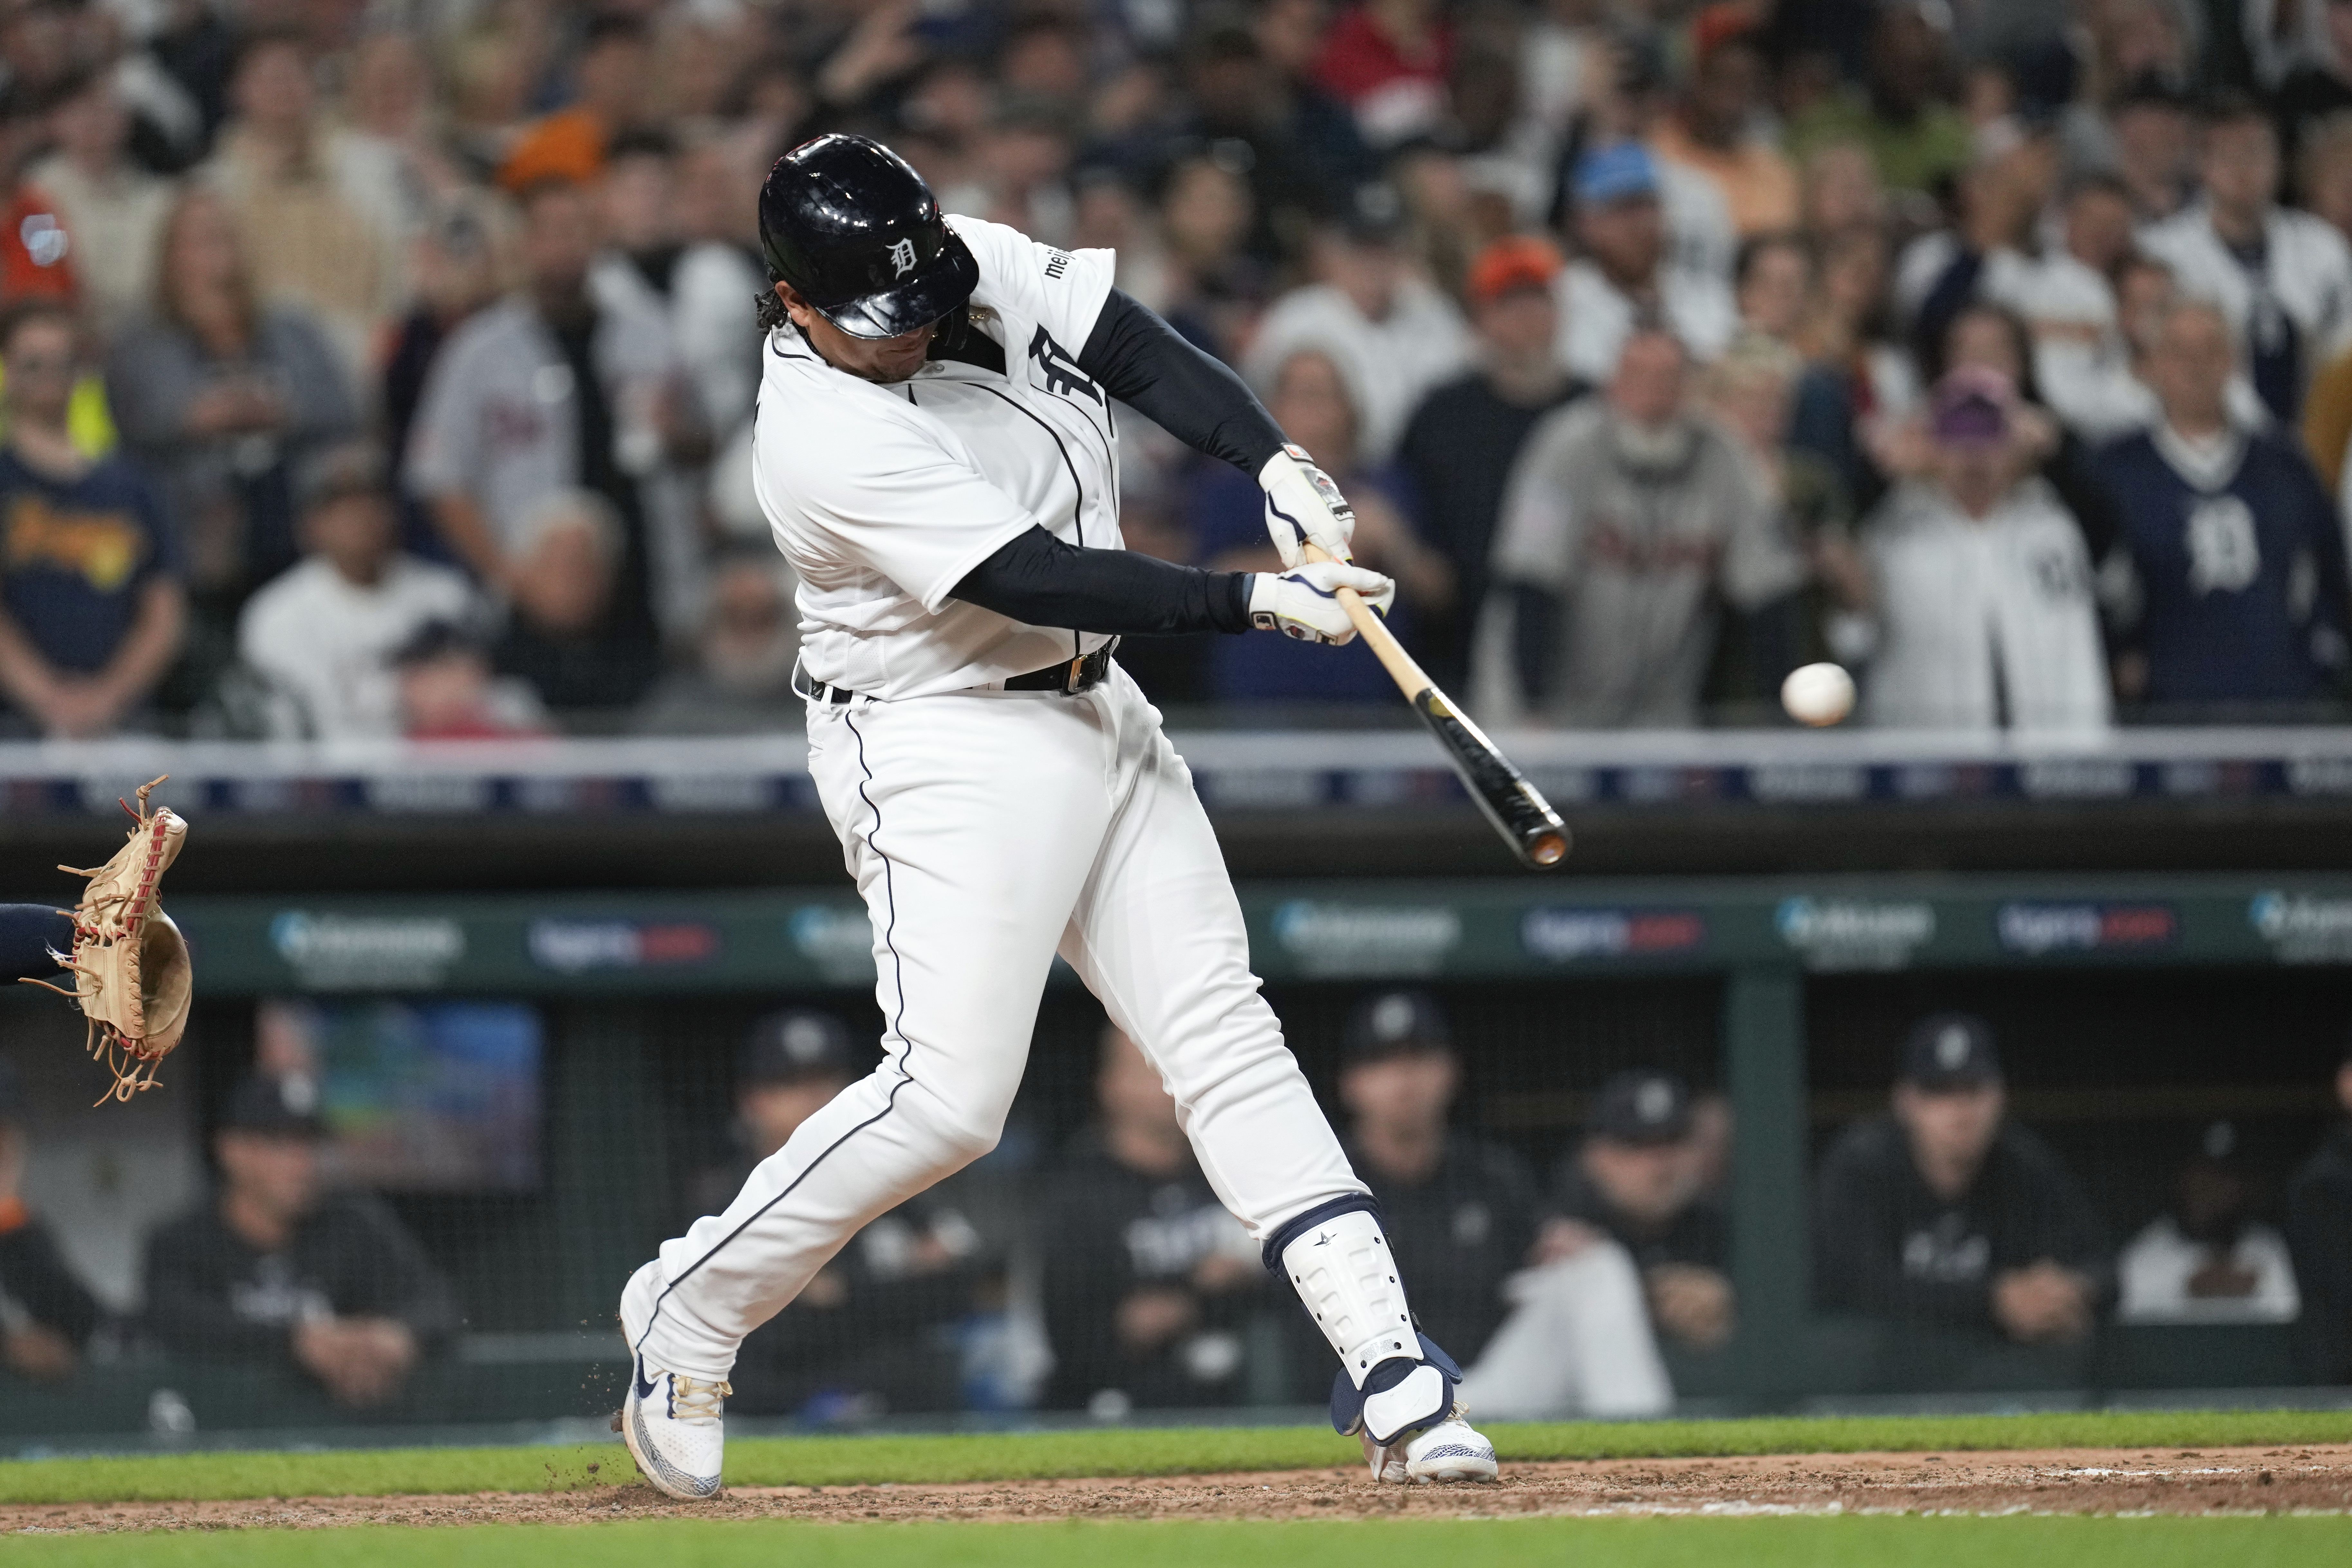 The retiring Cabrera's 3 hits not enough in Tigers' 7-5 loss to